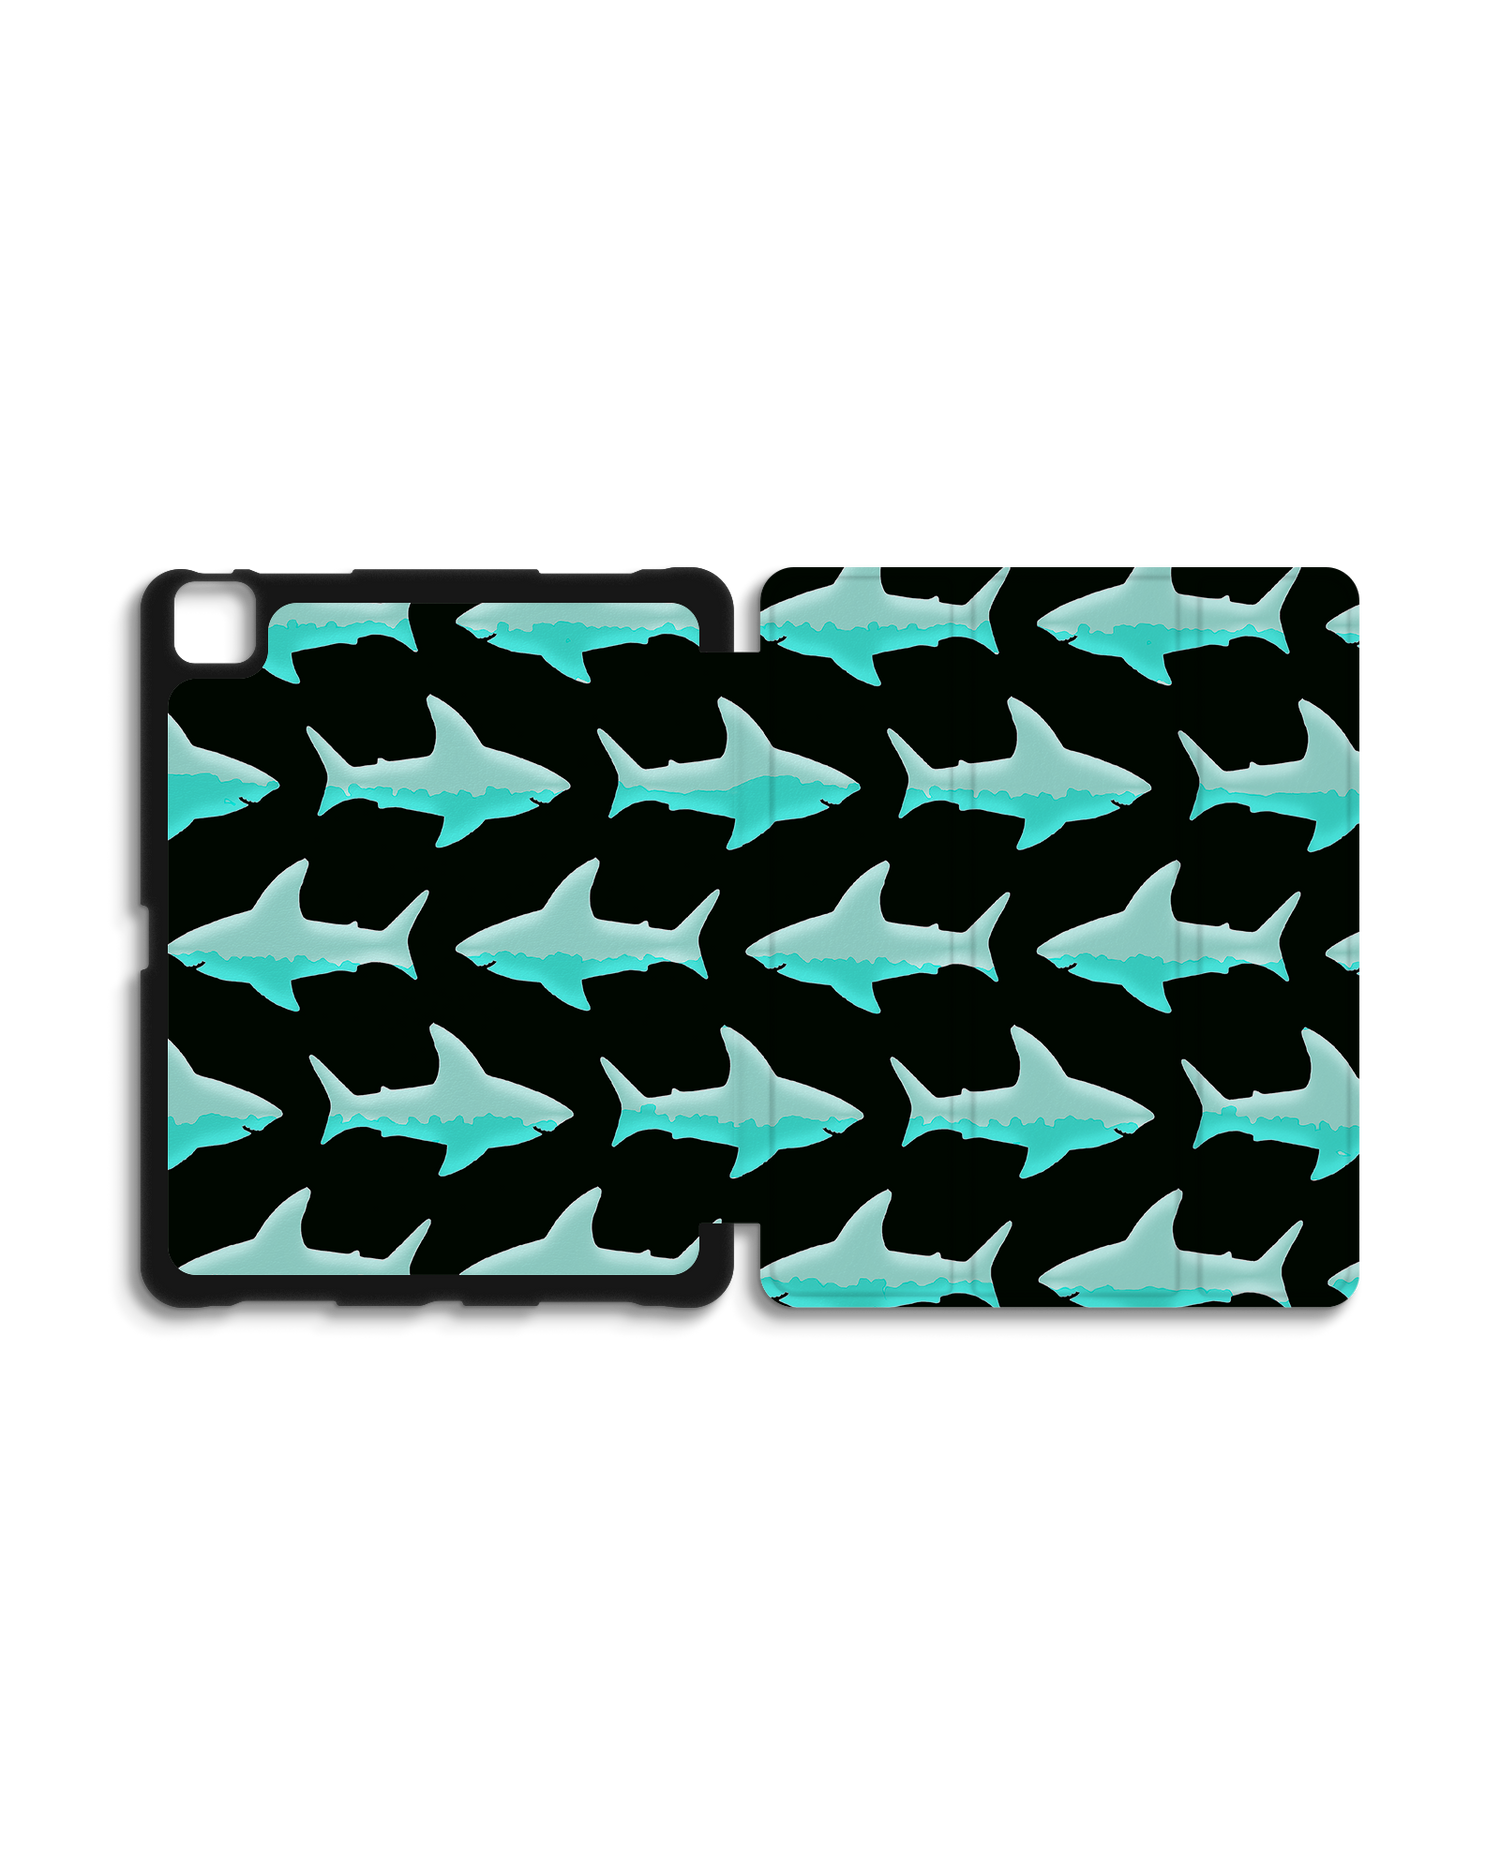 Neon Sharks iPad Case with Pencil Holder for Apple iPad Pro 6 12.9